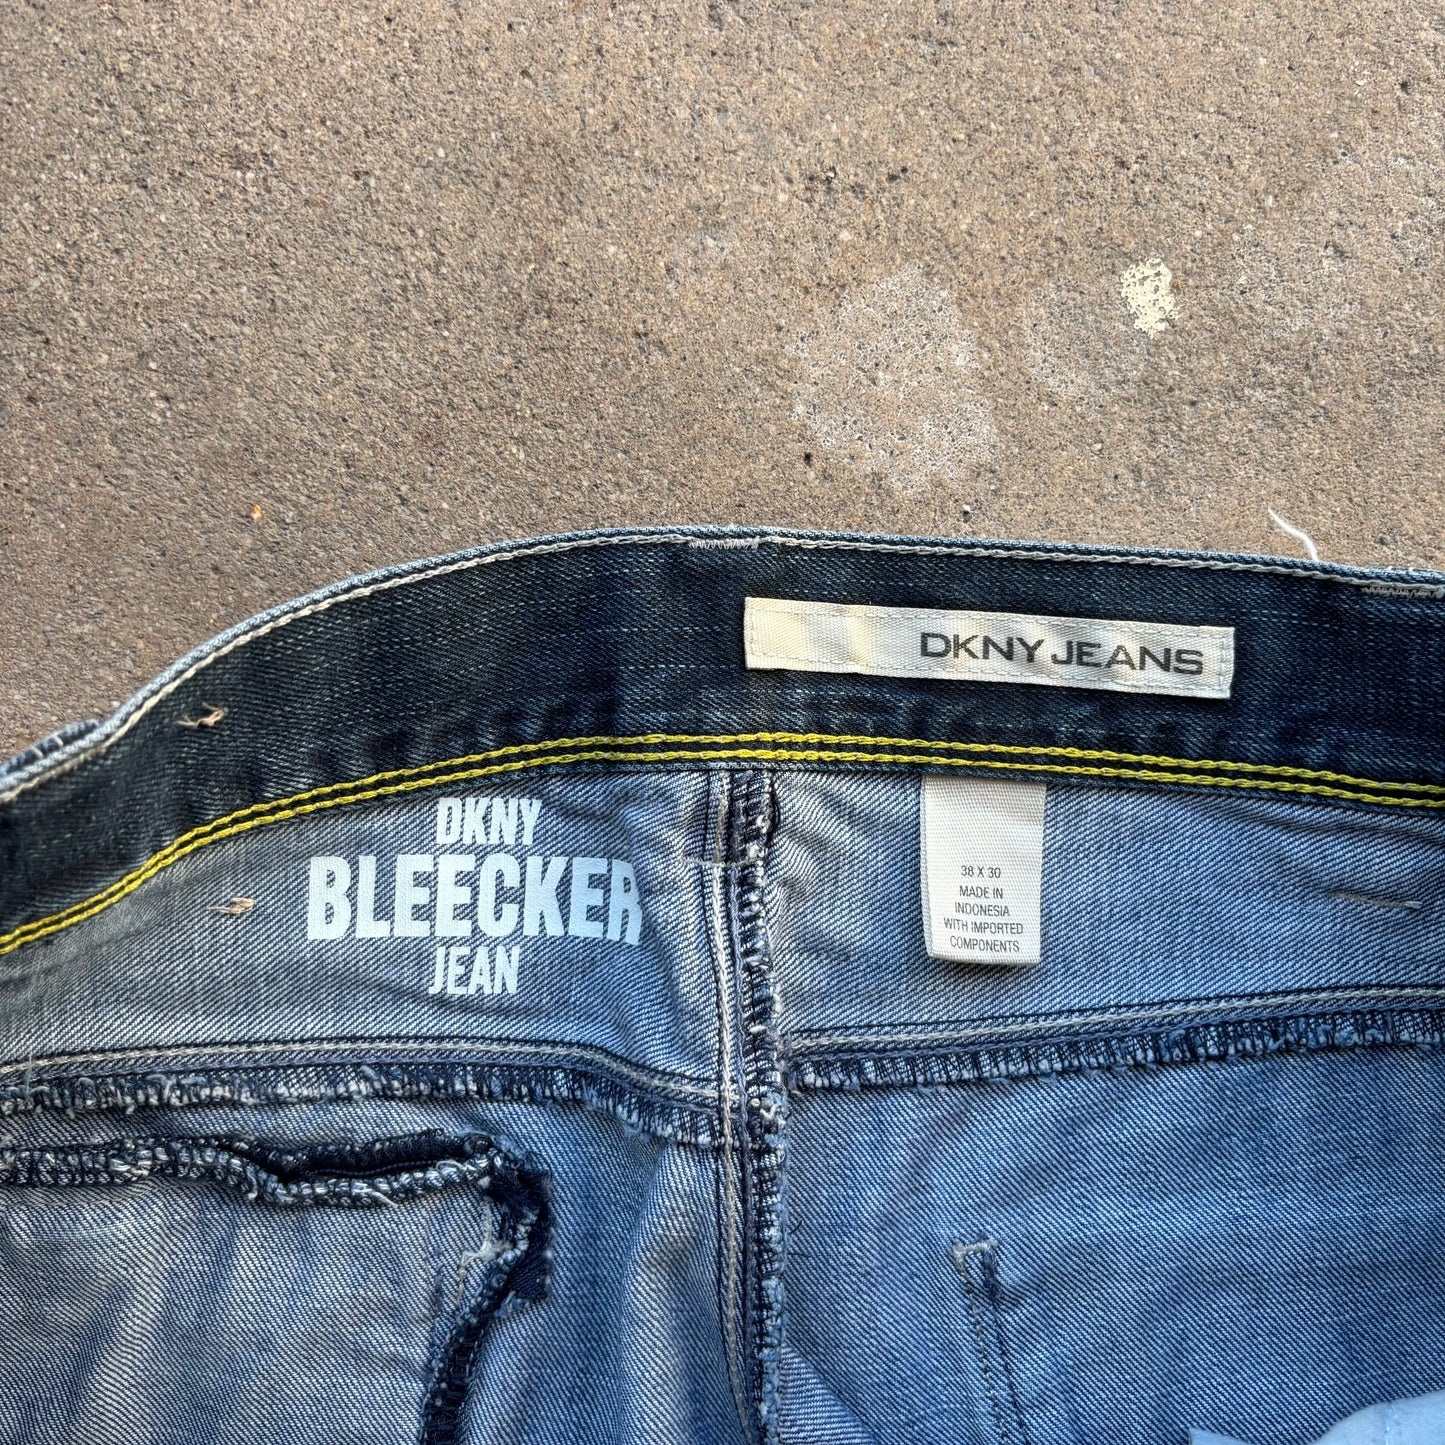 DKNY Grunge Style Jeans with Back Pocket Stitching